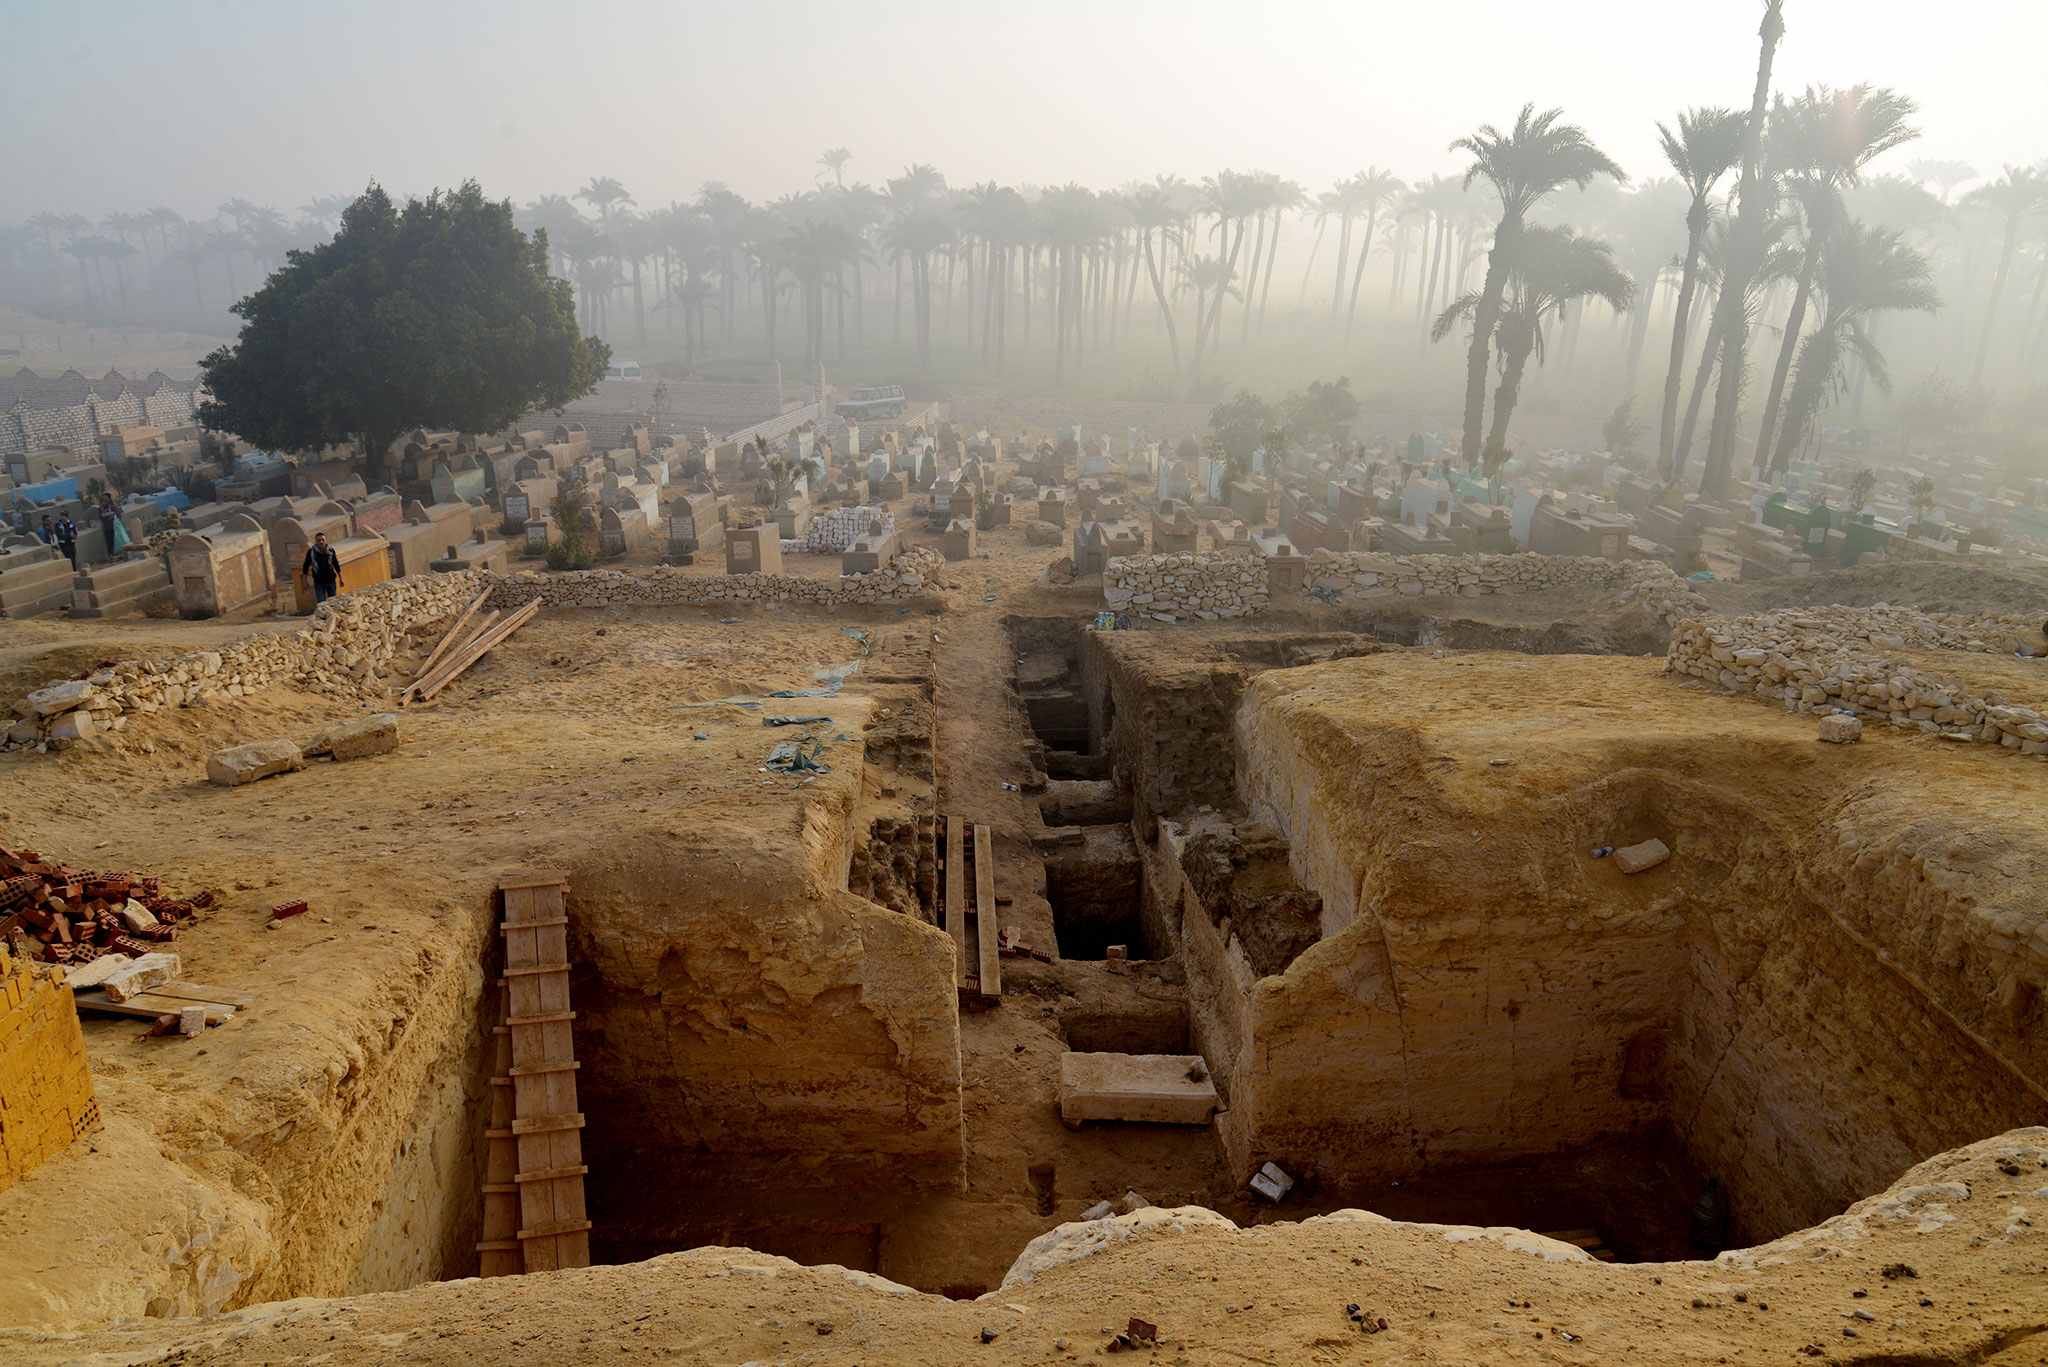 802 tombs and the 'Book of the Dead' were discovered in necropolis of Lisht in Egypt 1